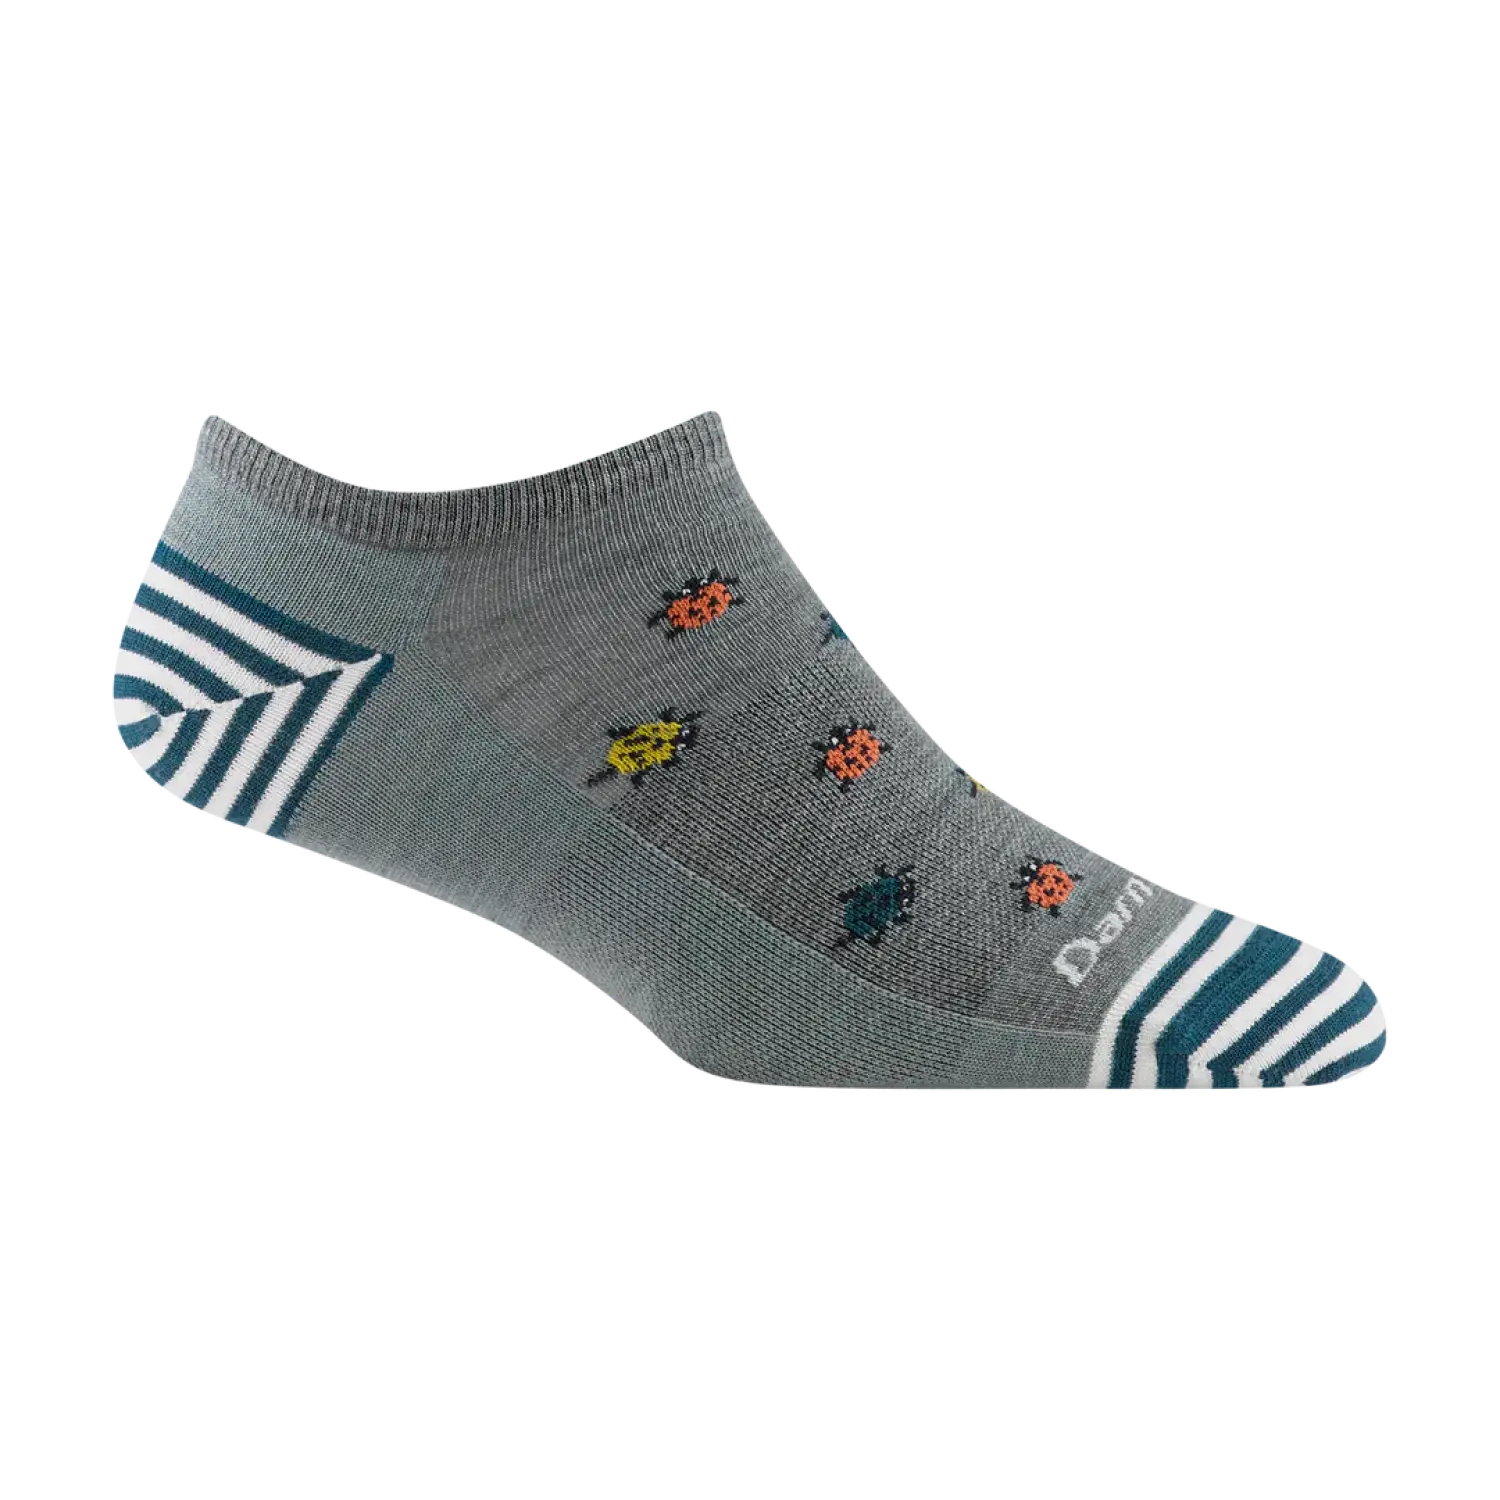 Darn Tough Women's Lucky Lady No Show Lightweight Lifestyle Sock shown in the Seafoam color option.